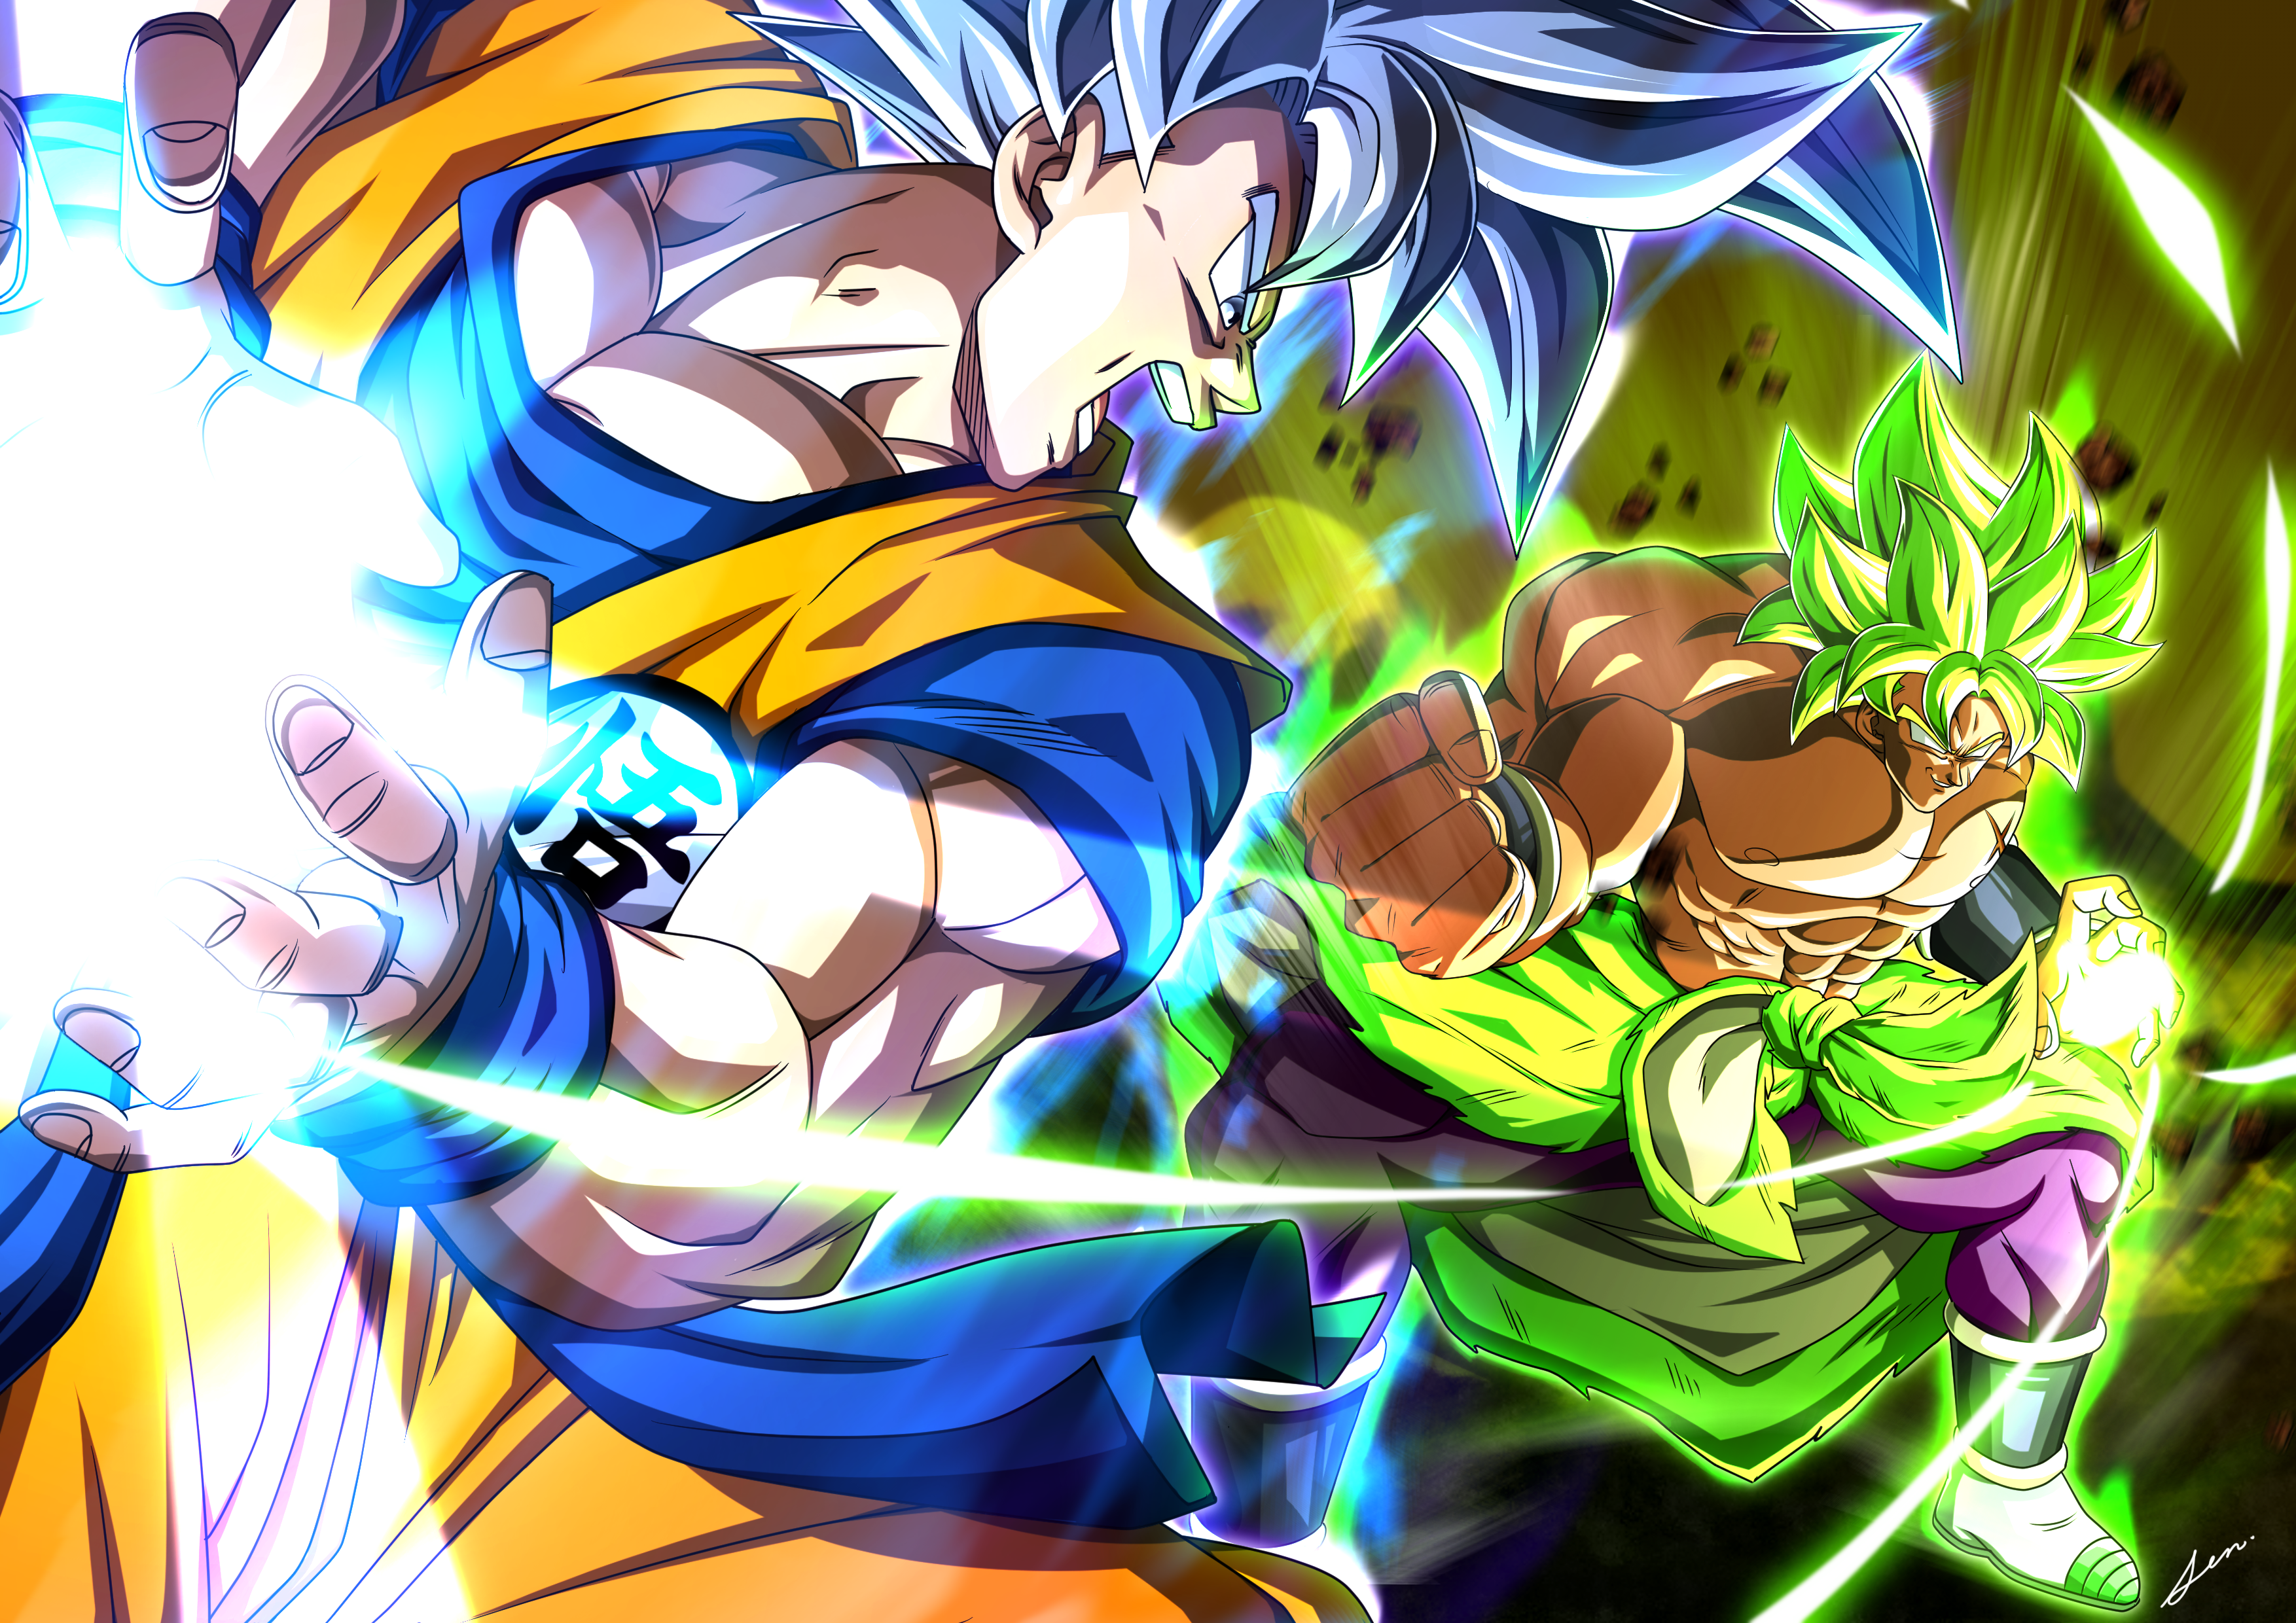 Goku Vs Broly by Duy Anh Nguyen